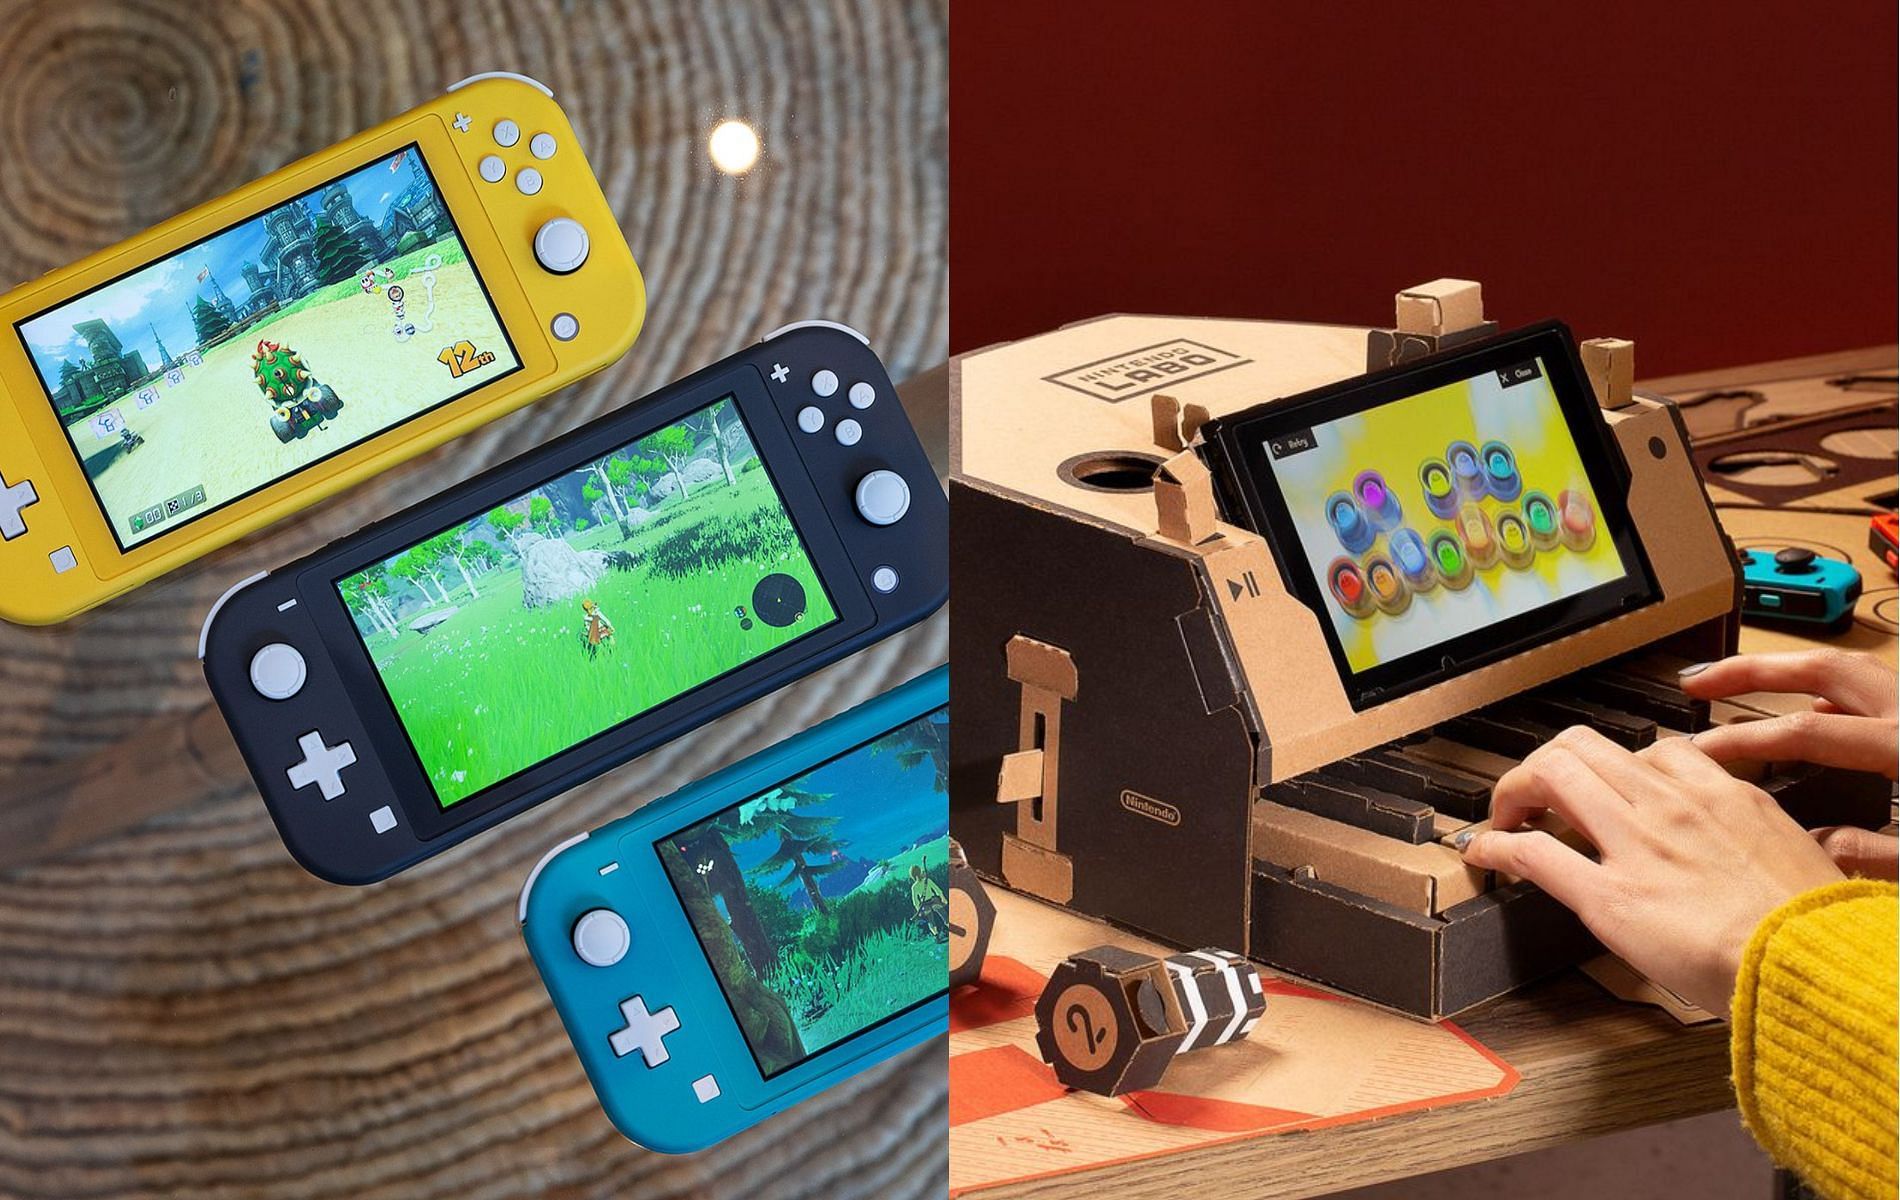 These games truly make creative uses of the hardware and its features (Images via Nintendo)